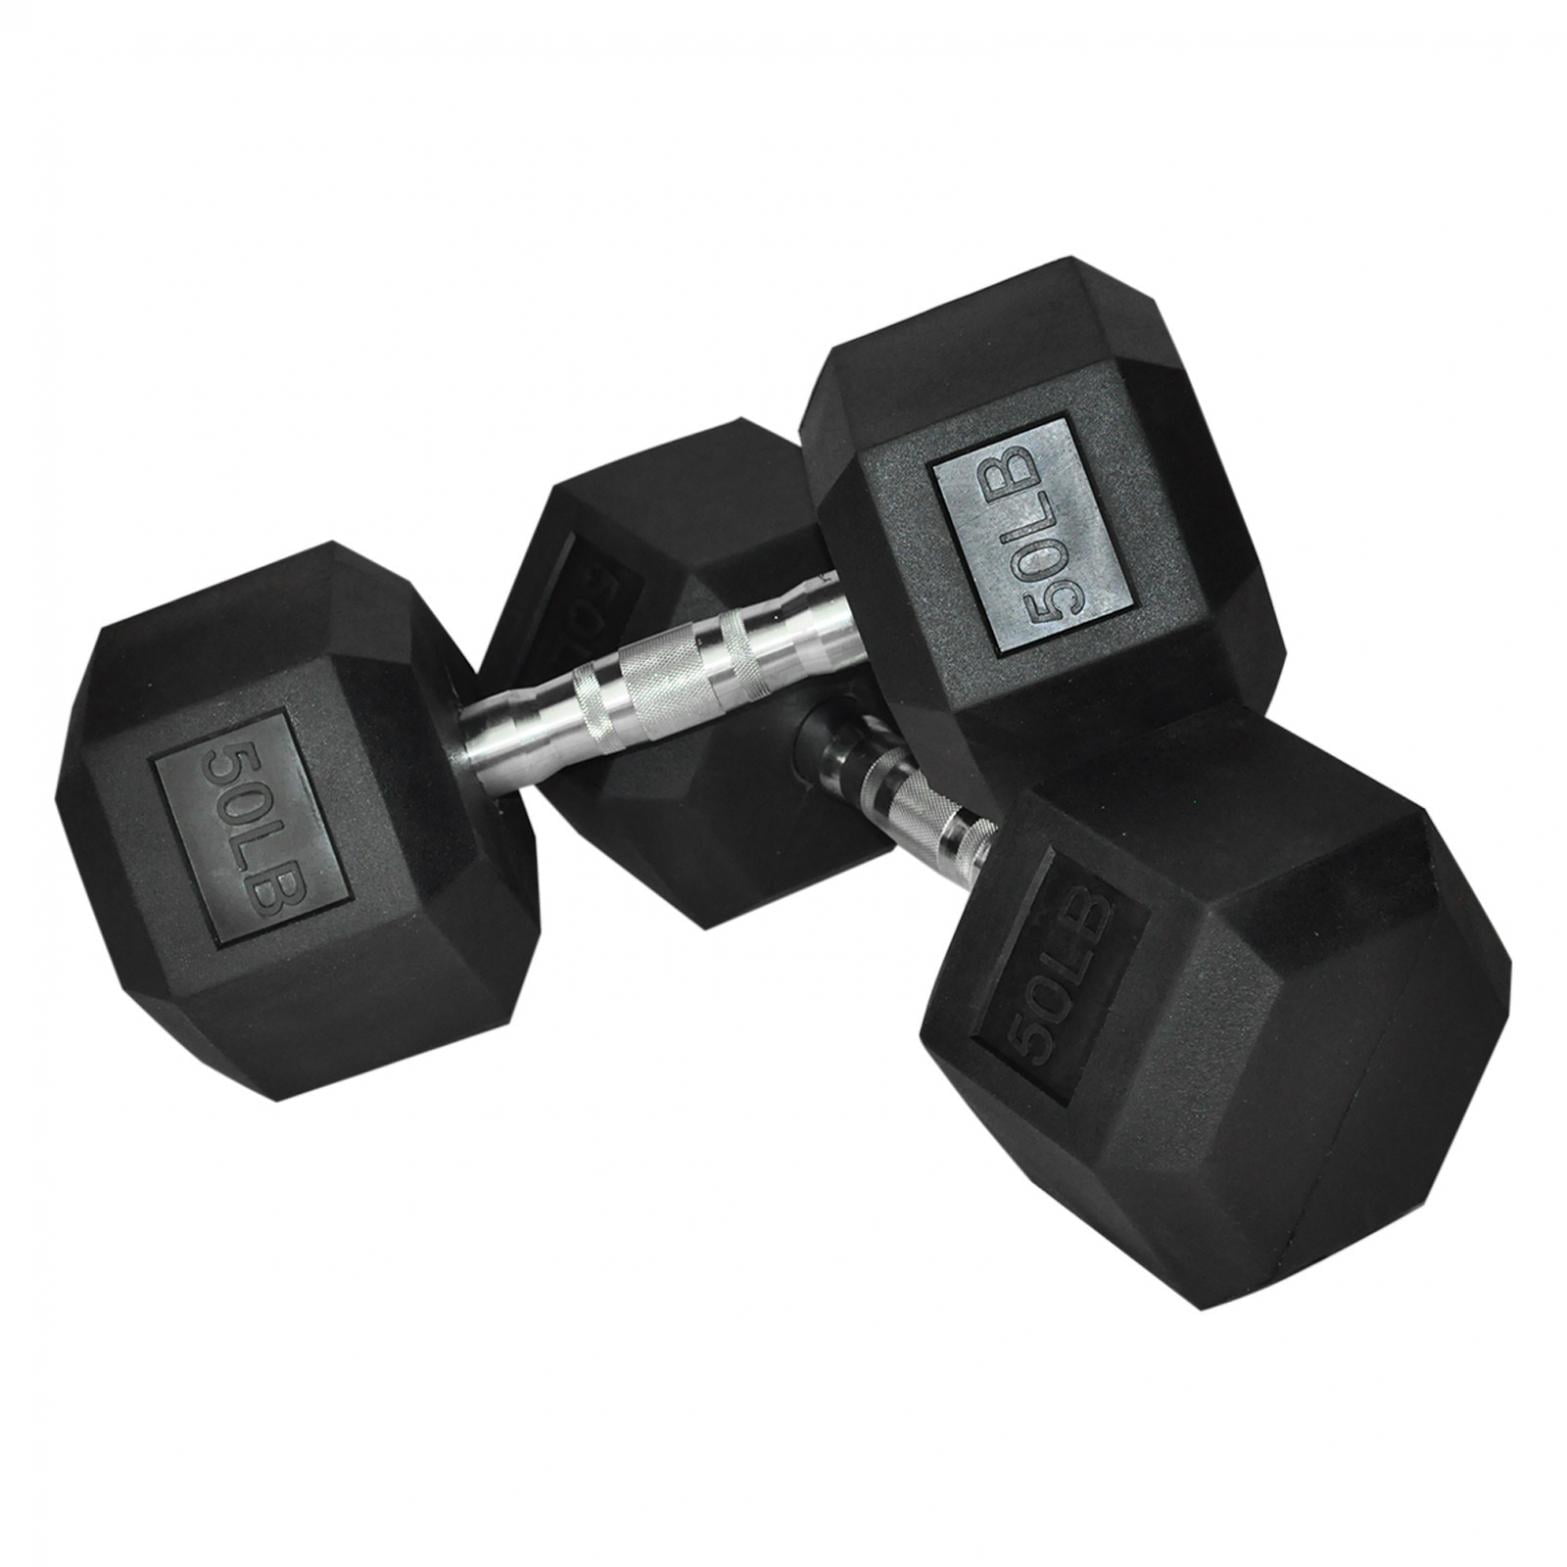 Qty:2 Ships Fast! Brand New Set Of Weider 15lb Dumbbells 30lb Total lbs 